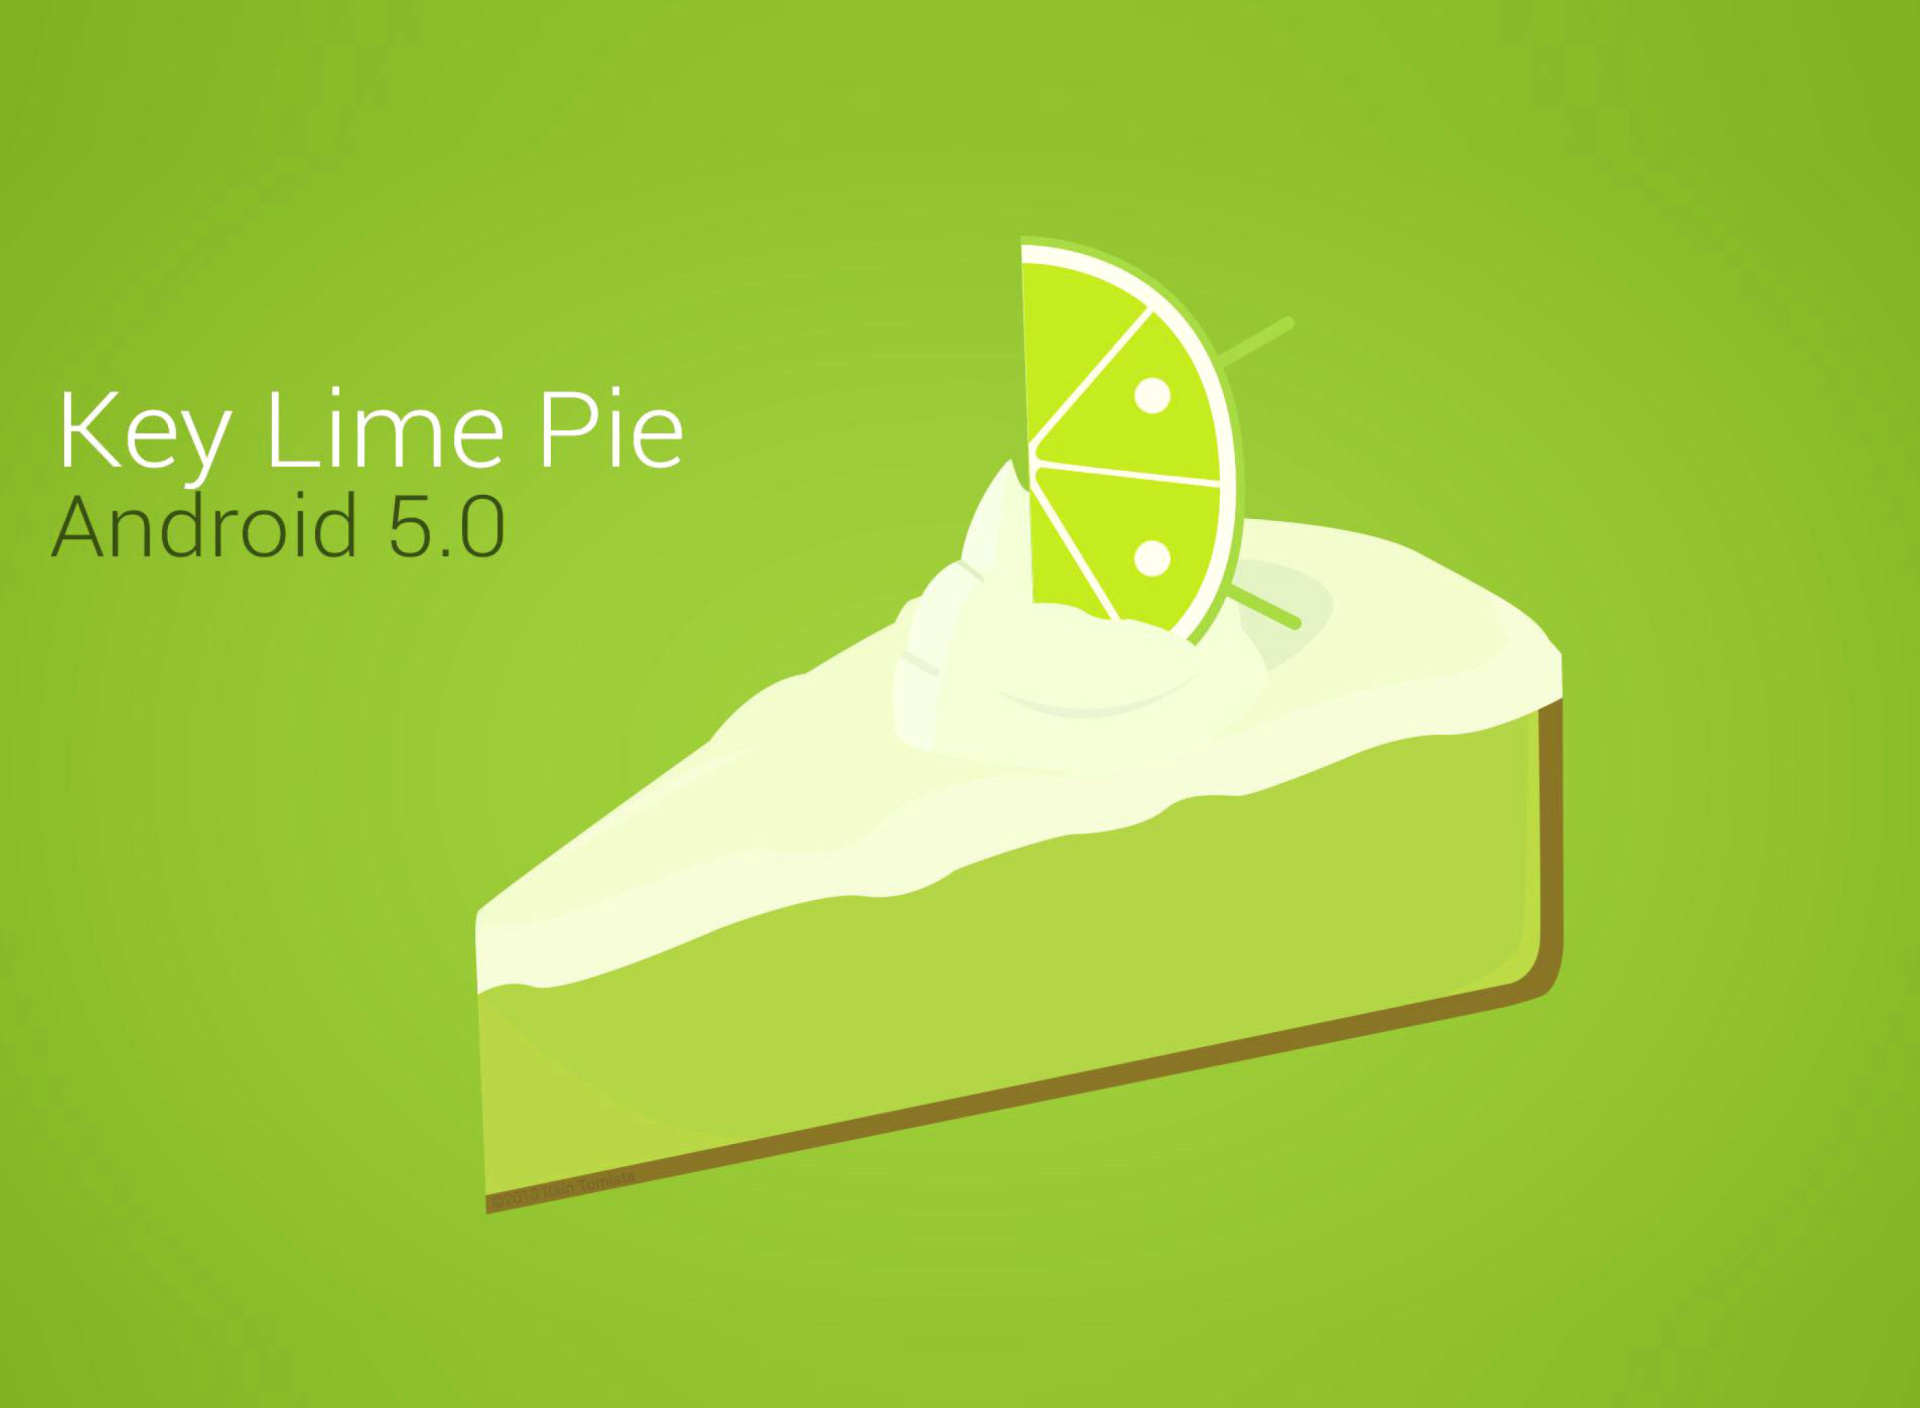 Concept Android 5.0 Key Lime Pie screenshot #1 1920x1408